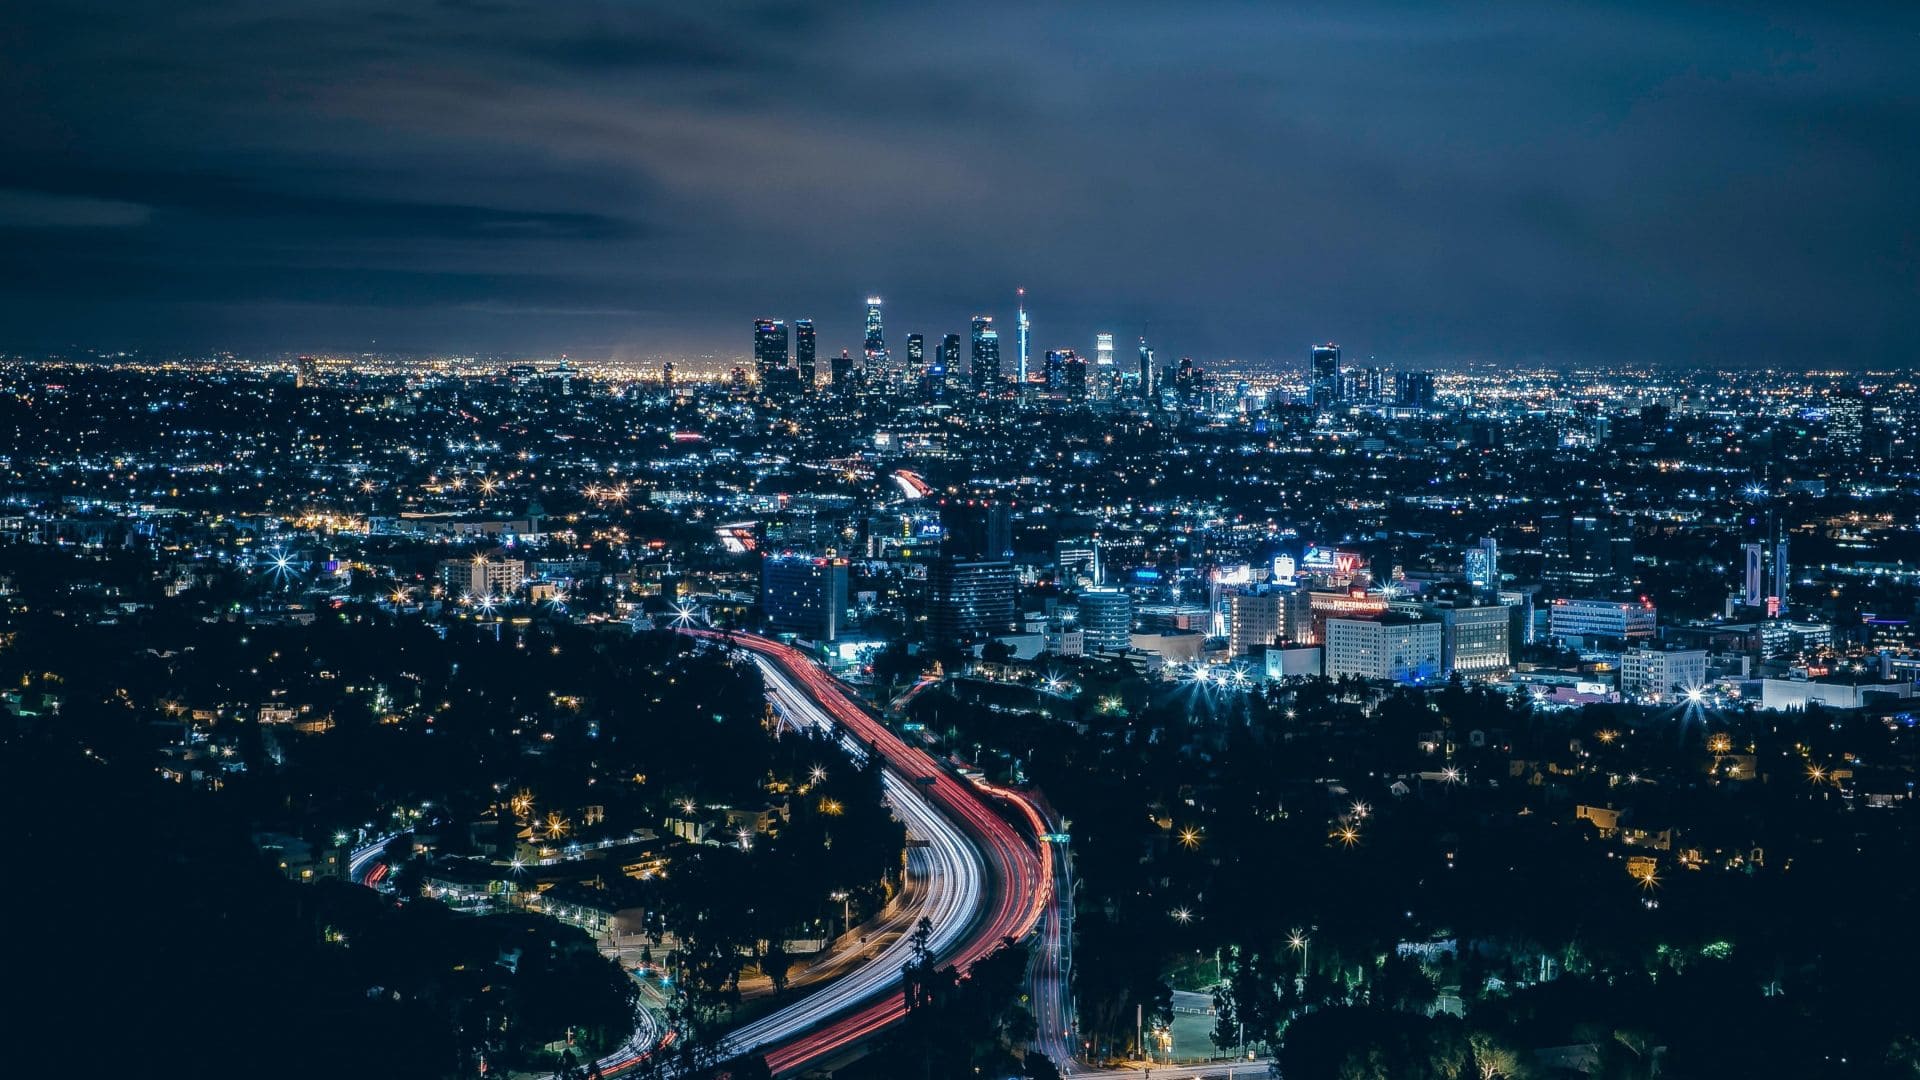 Cool Los Angeles Wallpapers